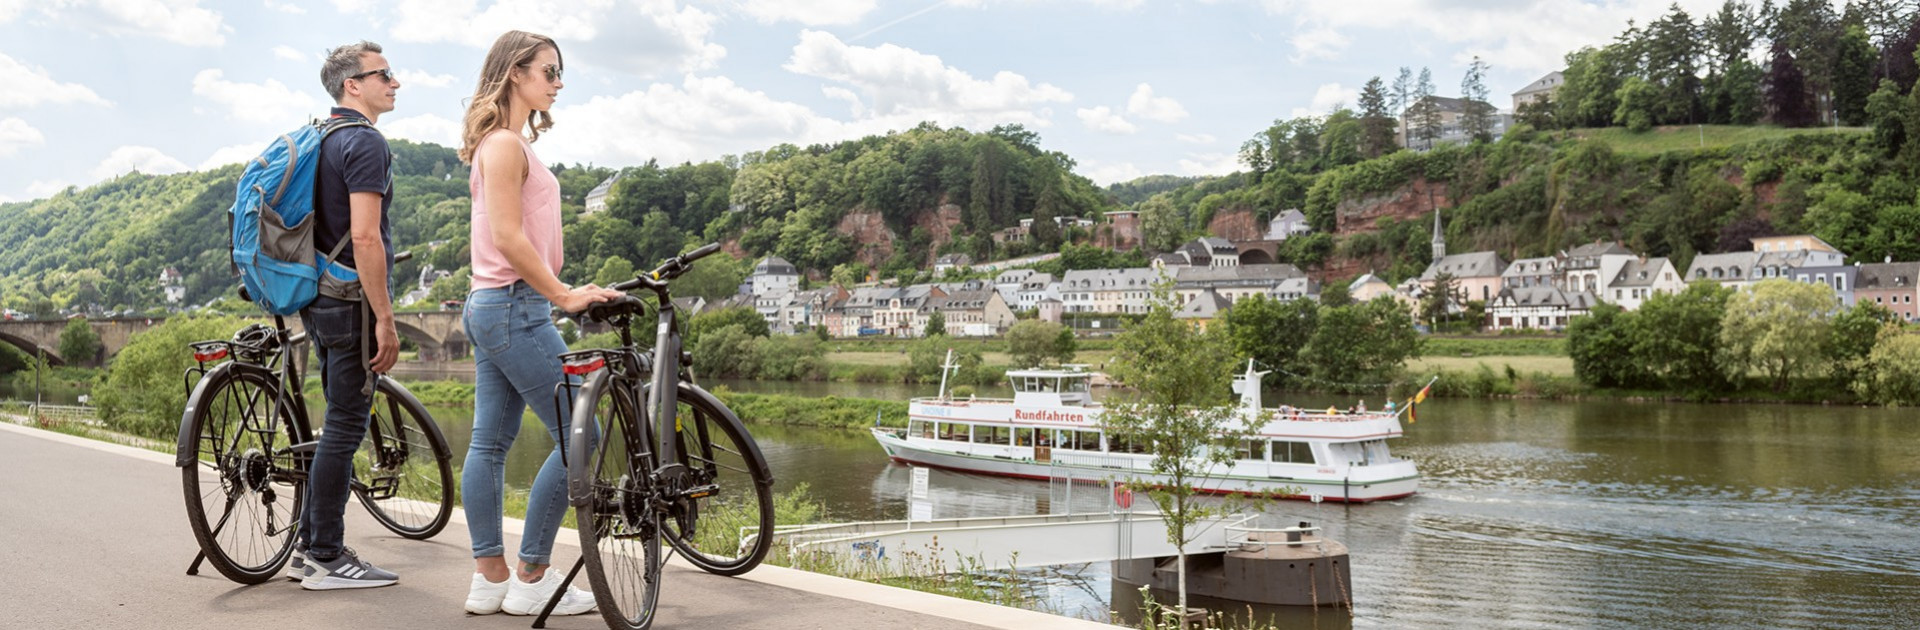 Moselle River Cyclists River Cruise - © PhotoGroove